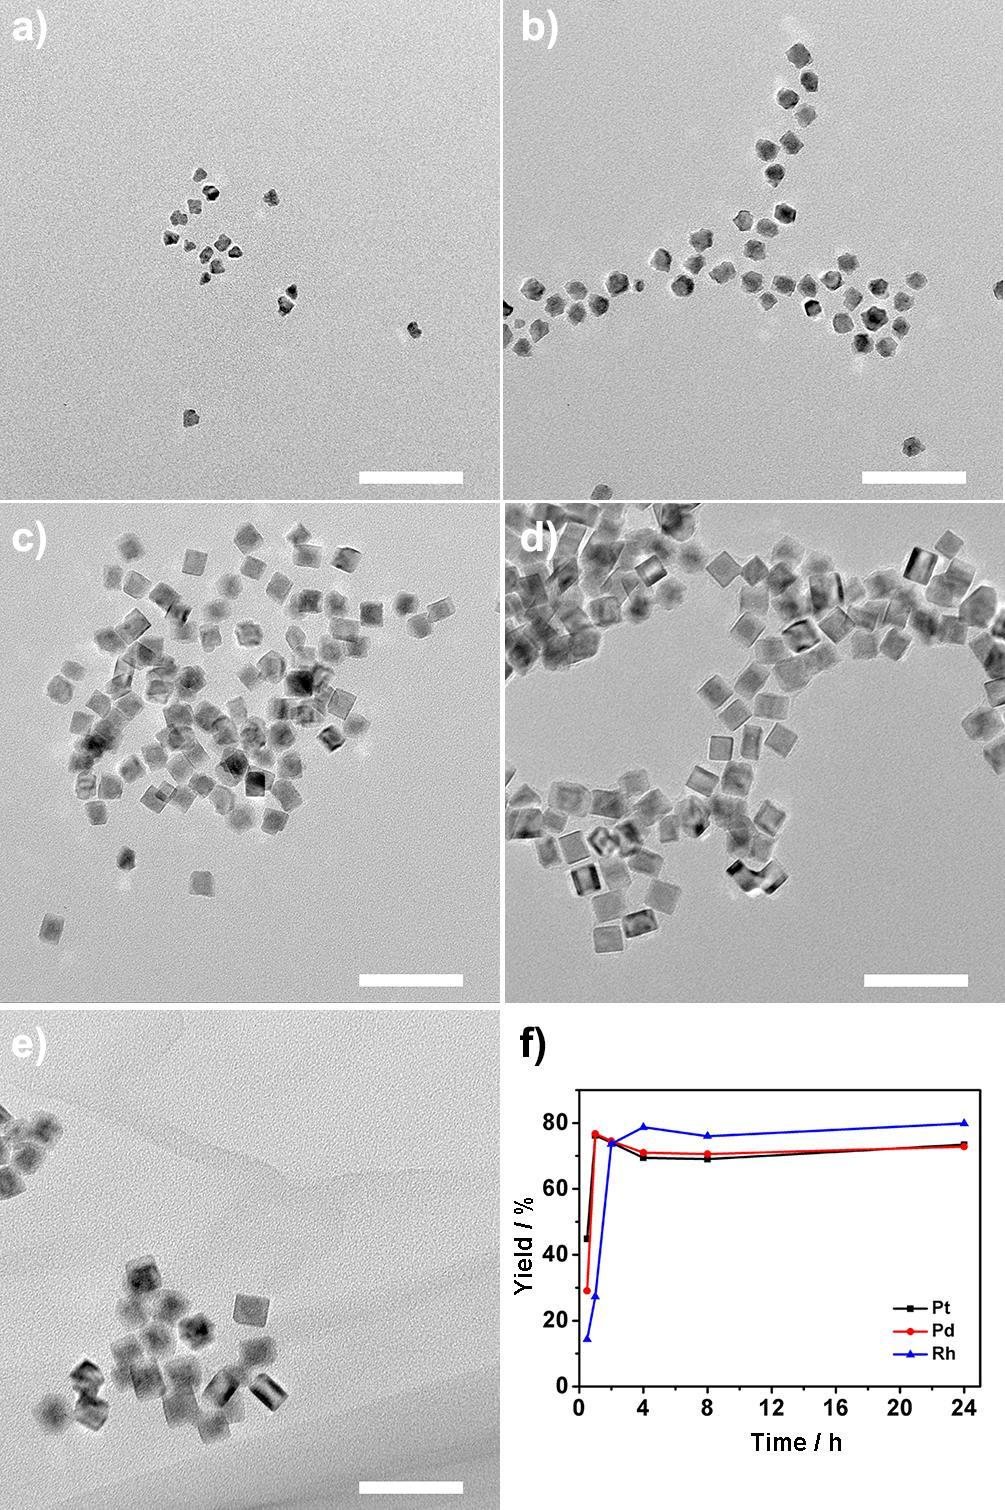 Figure S9. TEM images of Pt Pd Rh nanocrystals obtained from varied reaction time of synthesis: a) 0.5 h, b) 1.5 h, c) 2 h, d) 8 h, e) 24 h.